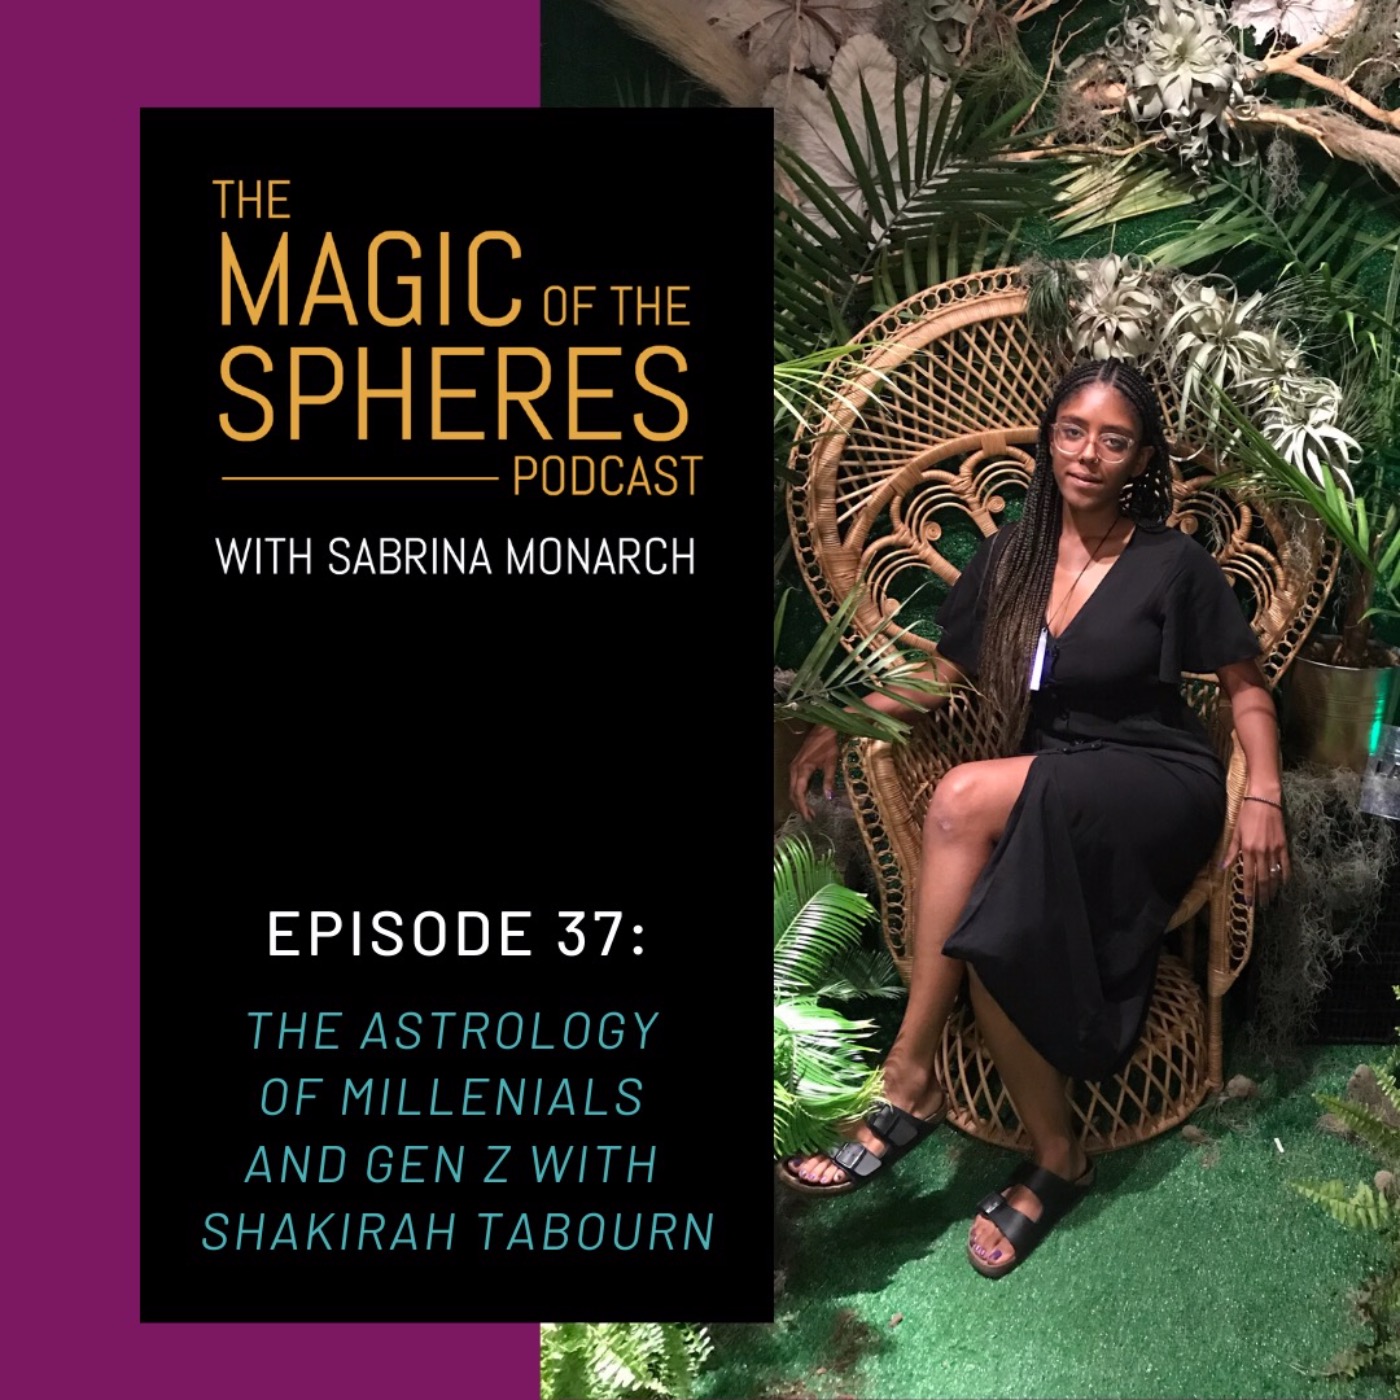 The Astrology of Millennials and Gen Z with Shakirah Tabourn